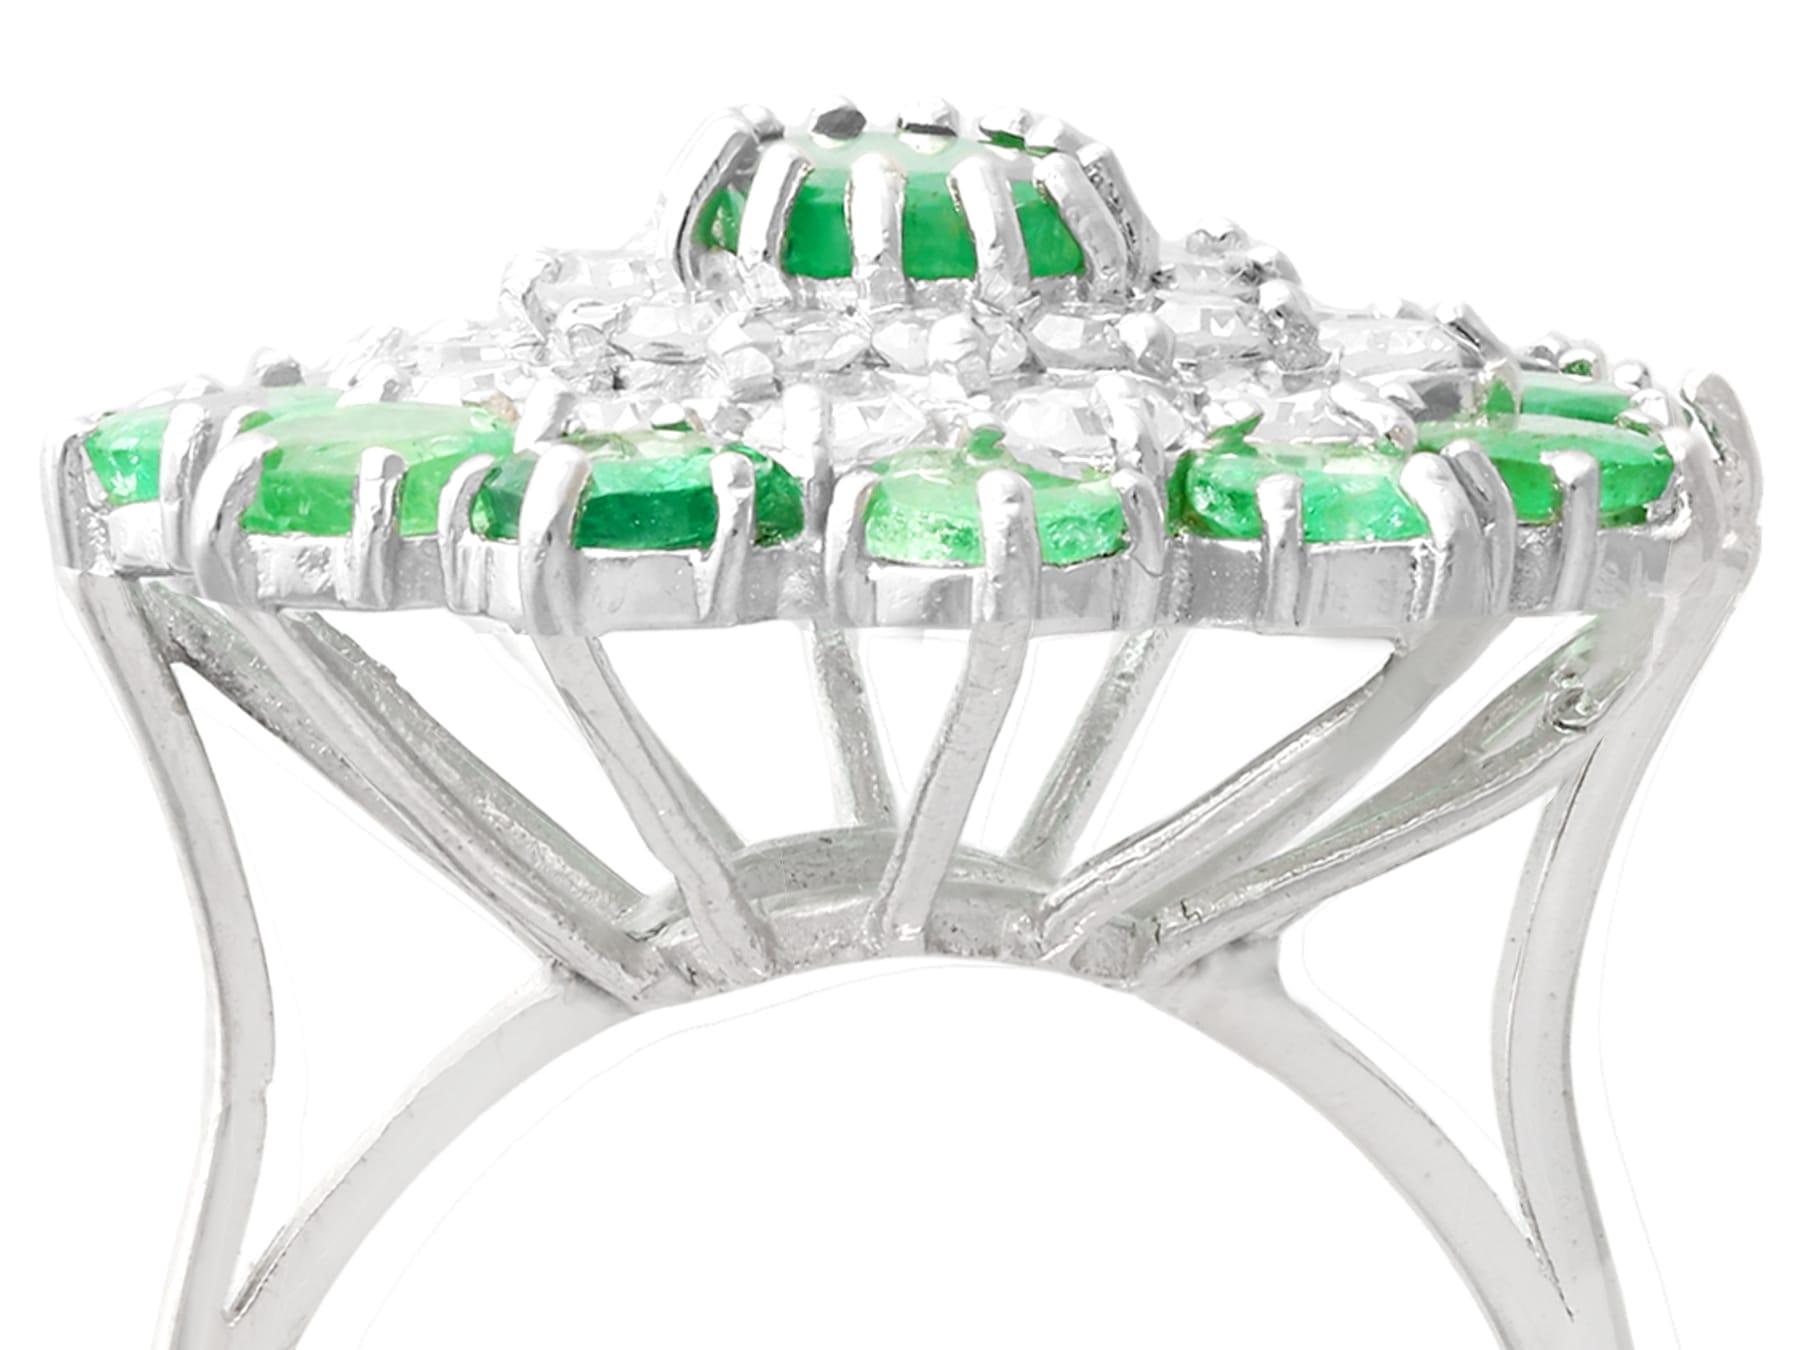 A fine and impressive vintage 3.29 carat natural emerald and 1.75 carat diamond 18 karat white gold cocktail ring; part of our diverse range of gemstone jewelry.

This impressive vintage oval cut cocktail ring has been crafted in 18k white